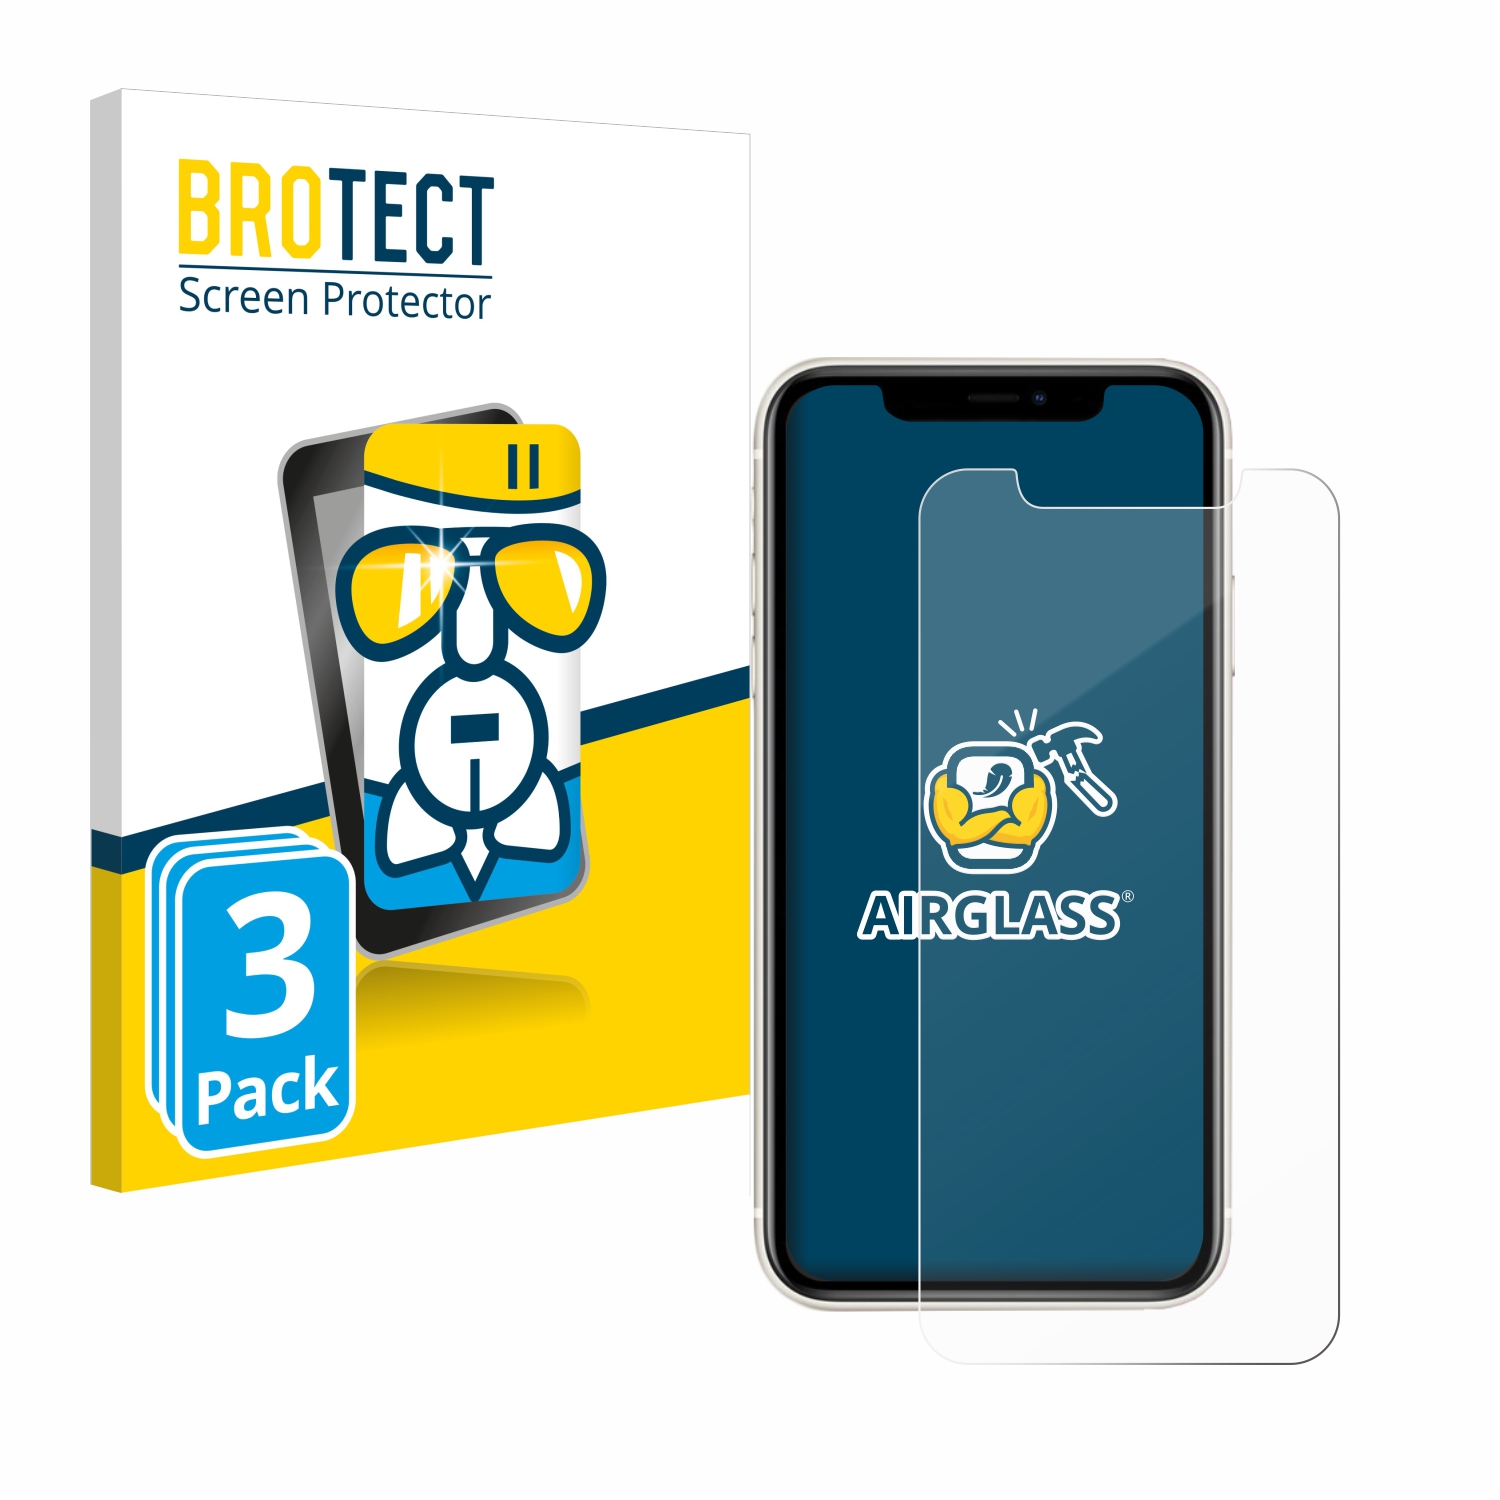 AirGlass brotect Glass Screen Protector compatible with Panasonic Lumix S5 9H Glass Protector